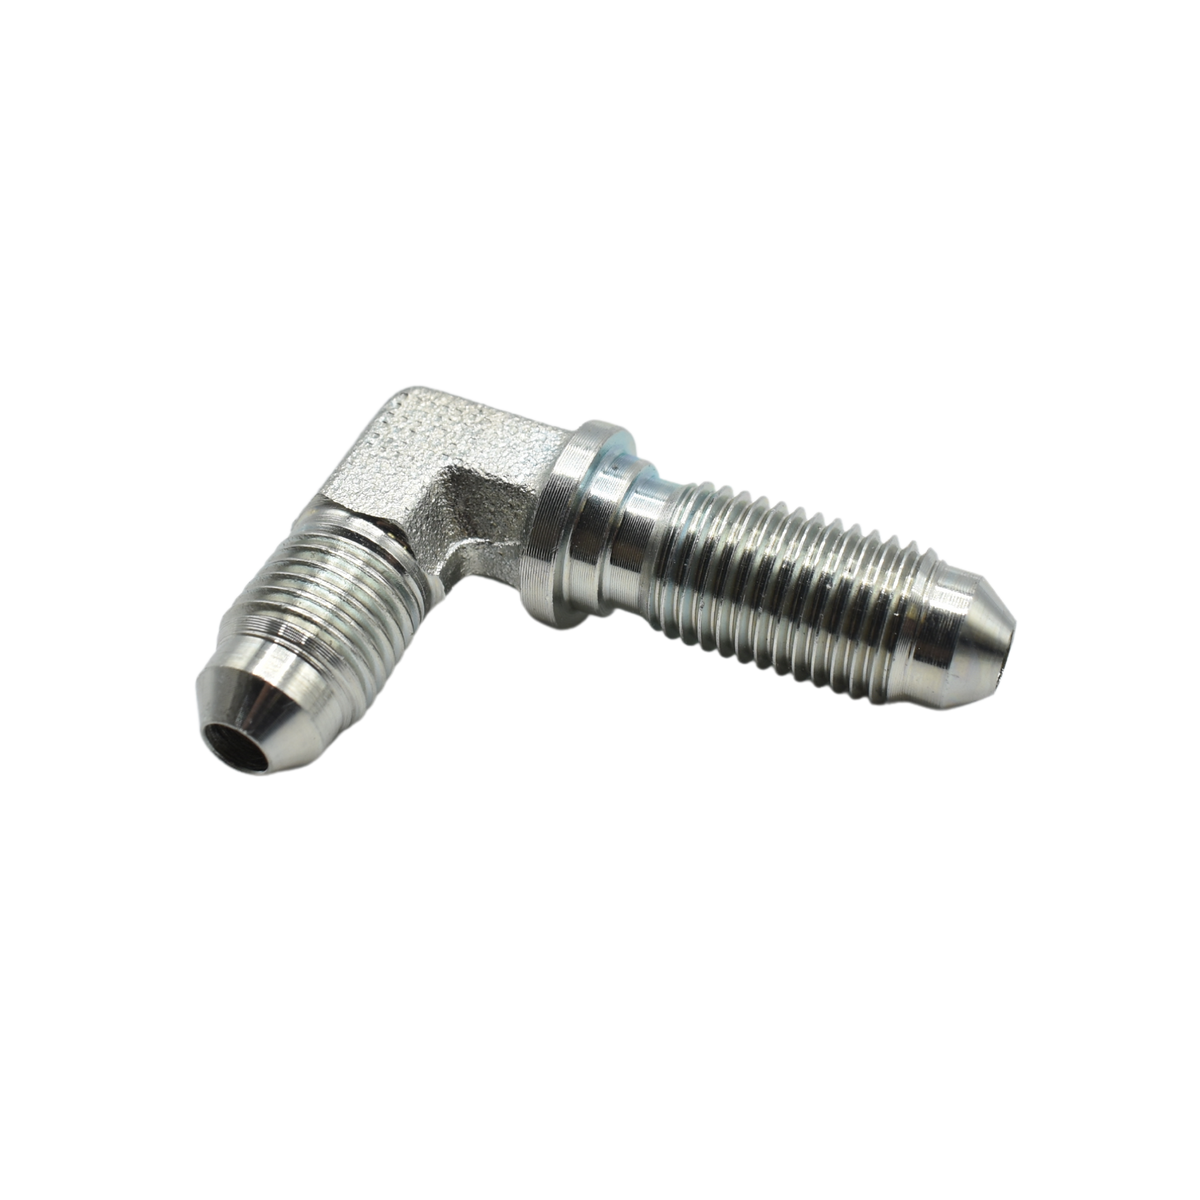 Bulkhead 90 degree Elbow Forged Adapter